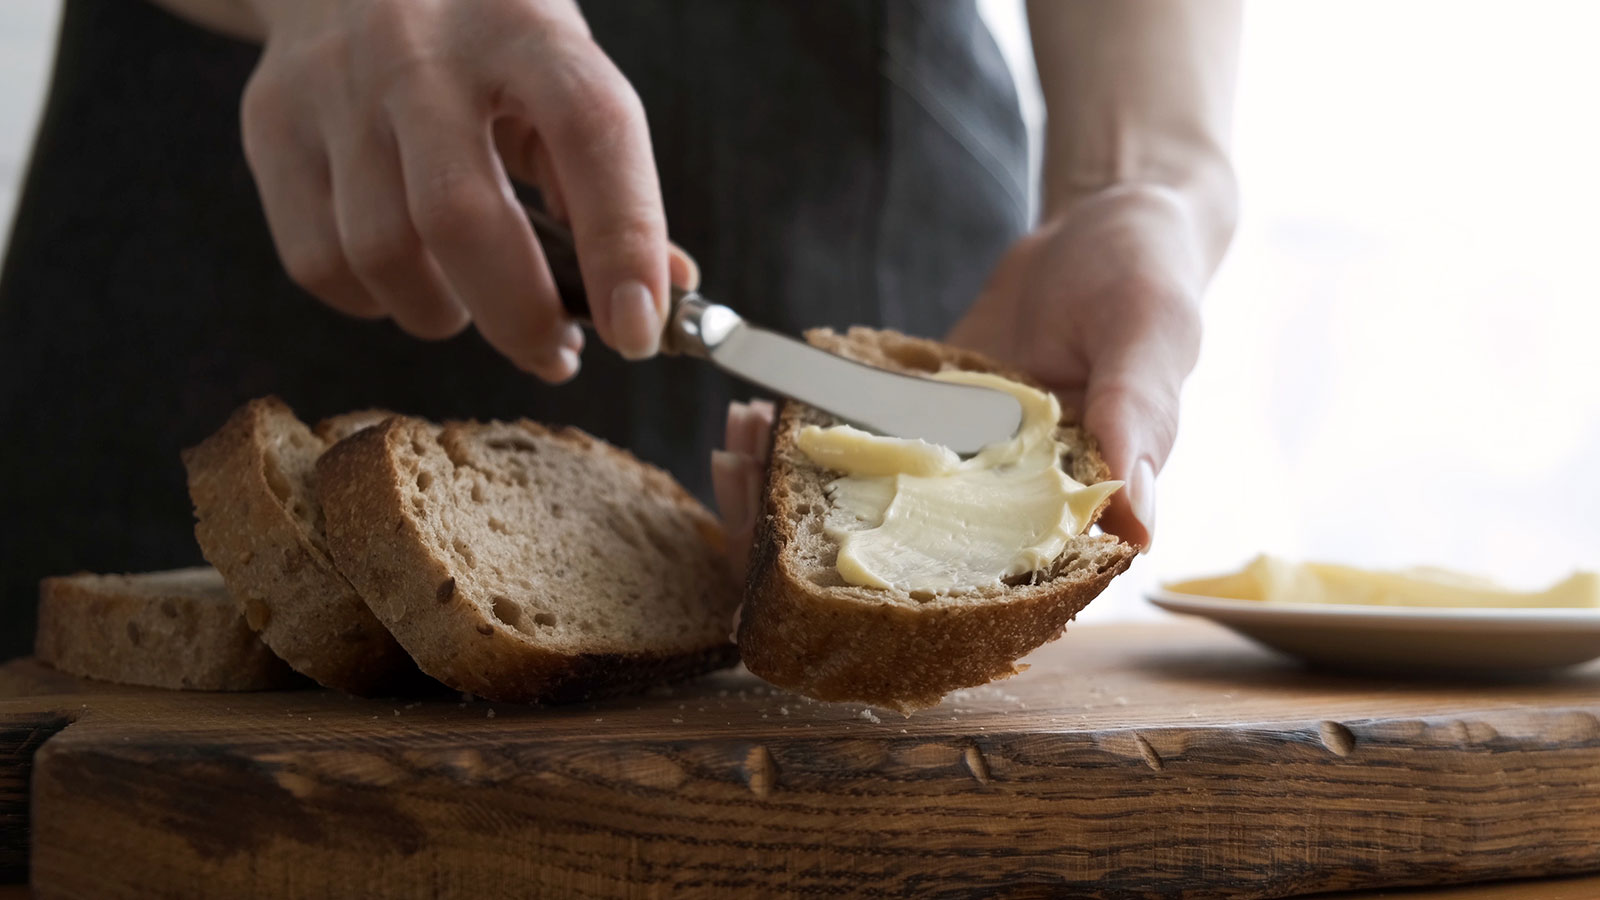 Has Margarine Become a Superfood?